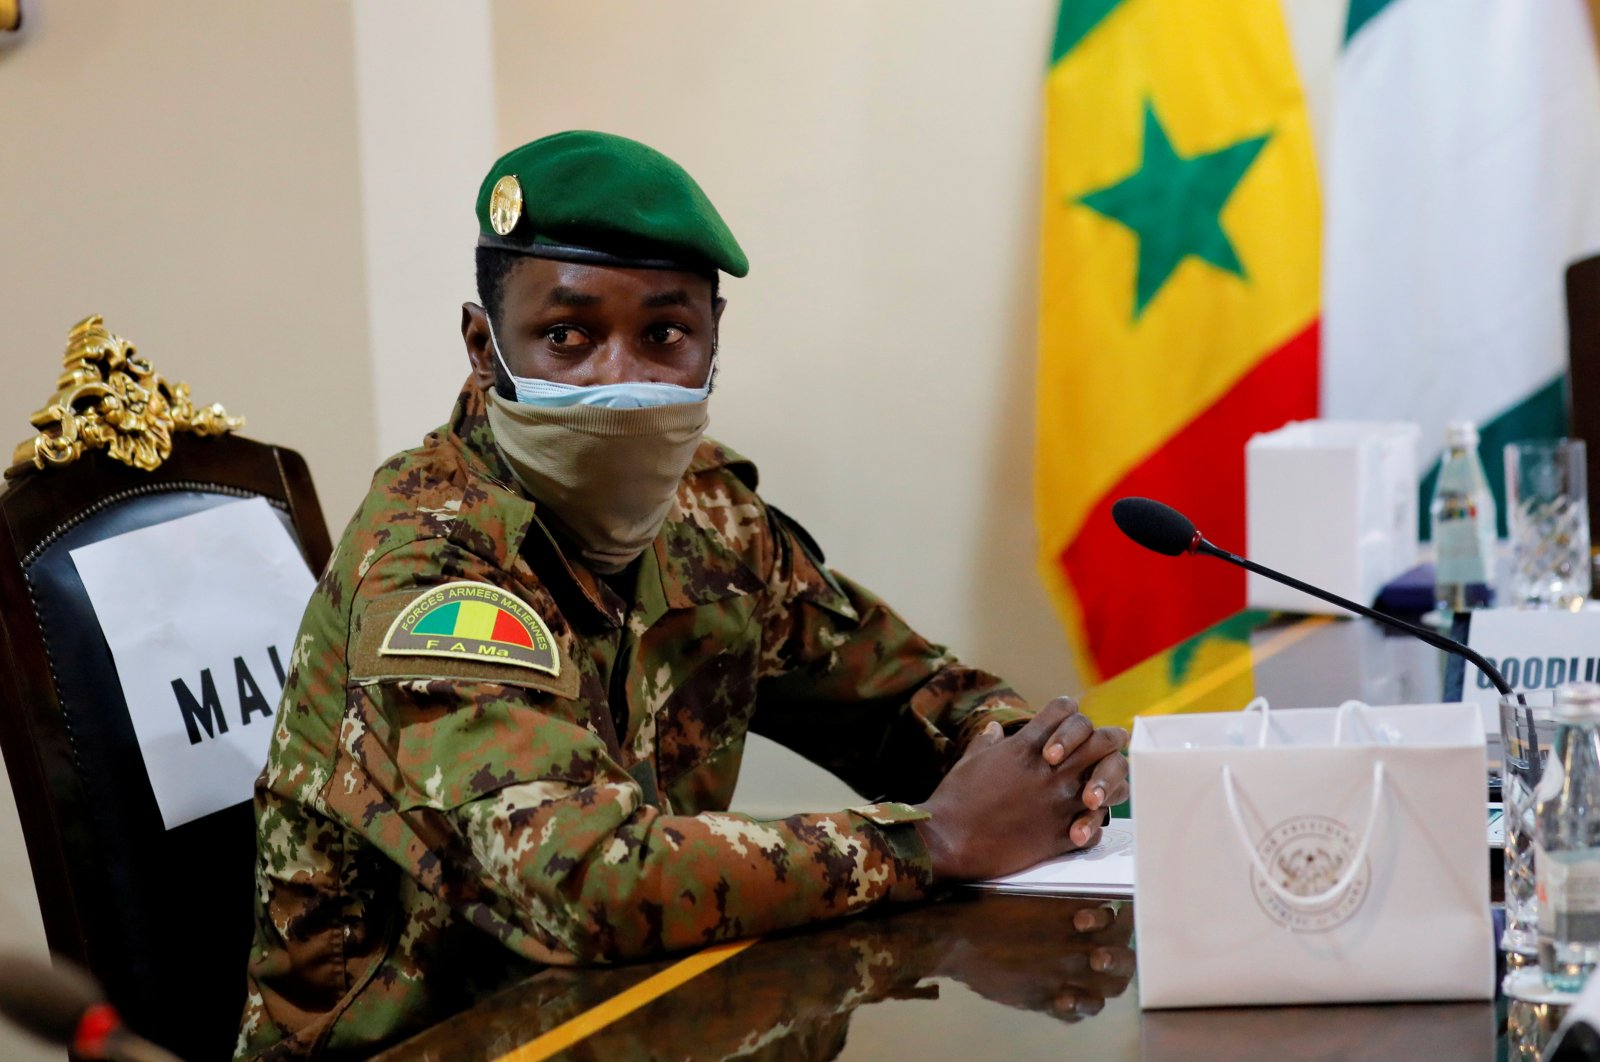 Col. Assimi Goita, leader of the Malian military junta, attends the Economic Community of West African States (ECOWAS) consultative meeting in Accra, Ghana September 15, 2020. (Reuters Photo)